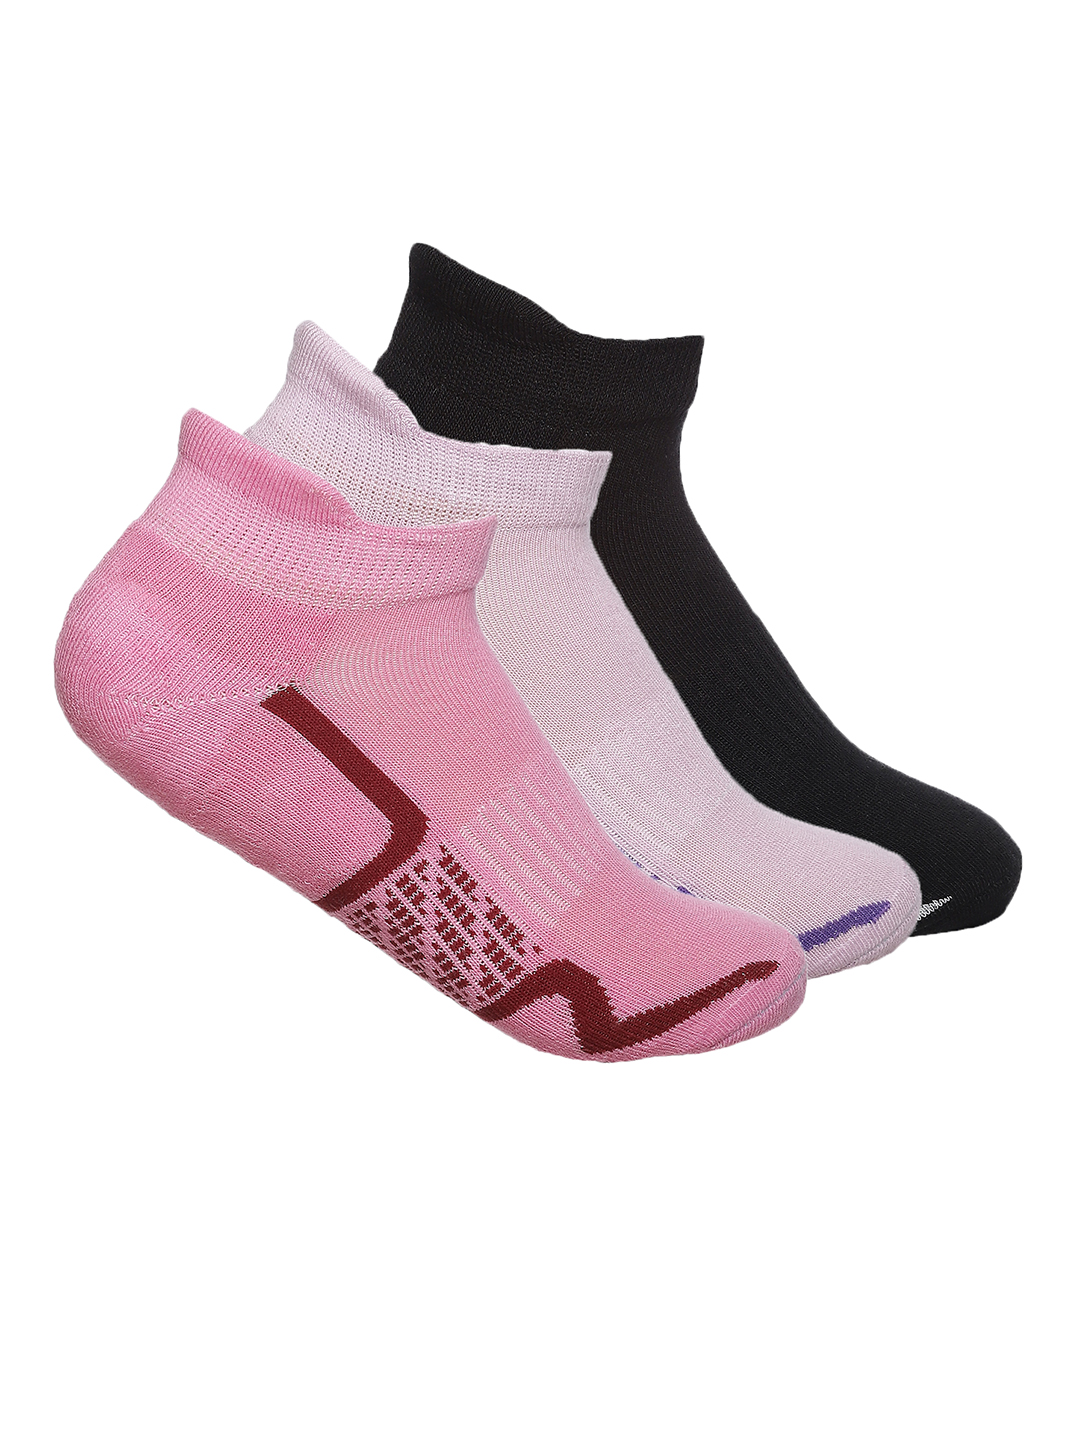 Sports Colourful Activewear Cotton Low Ankle Socks